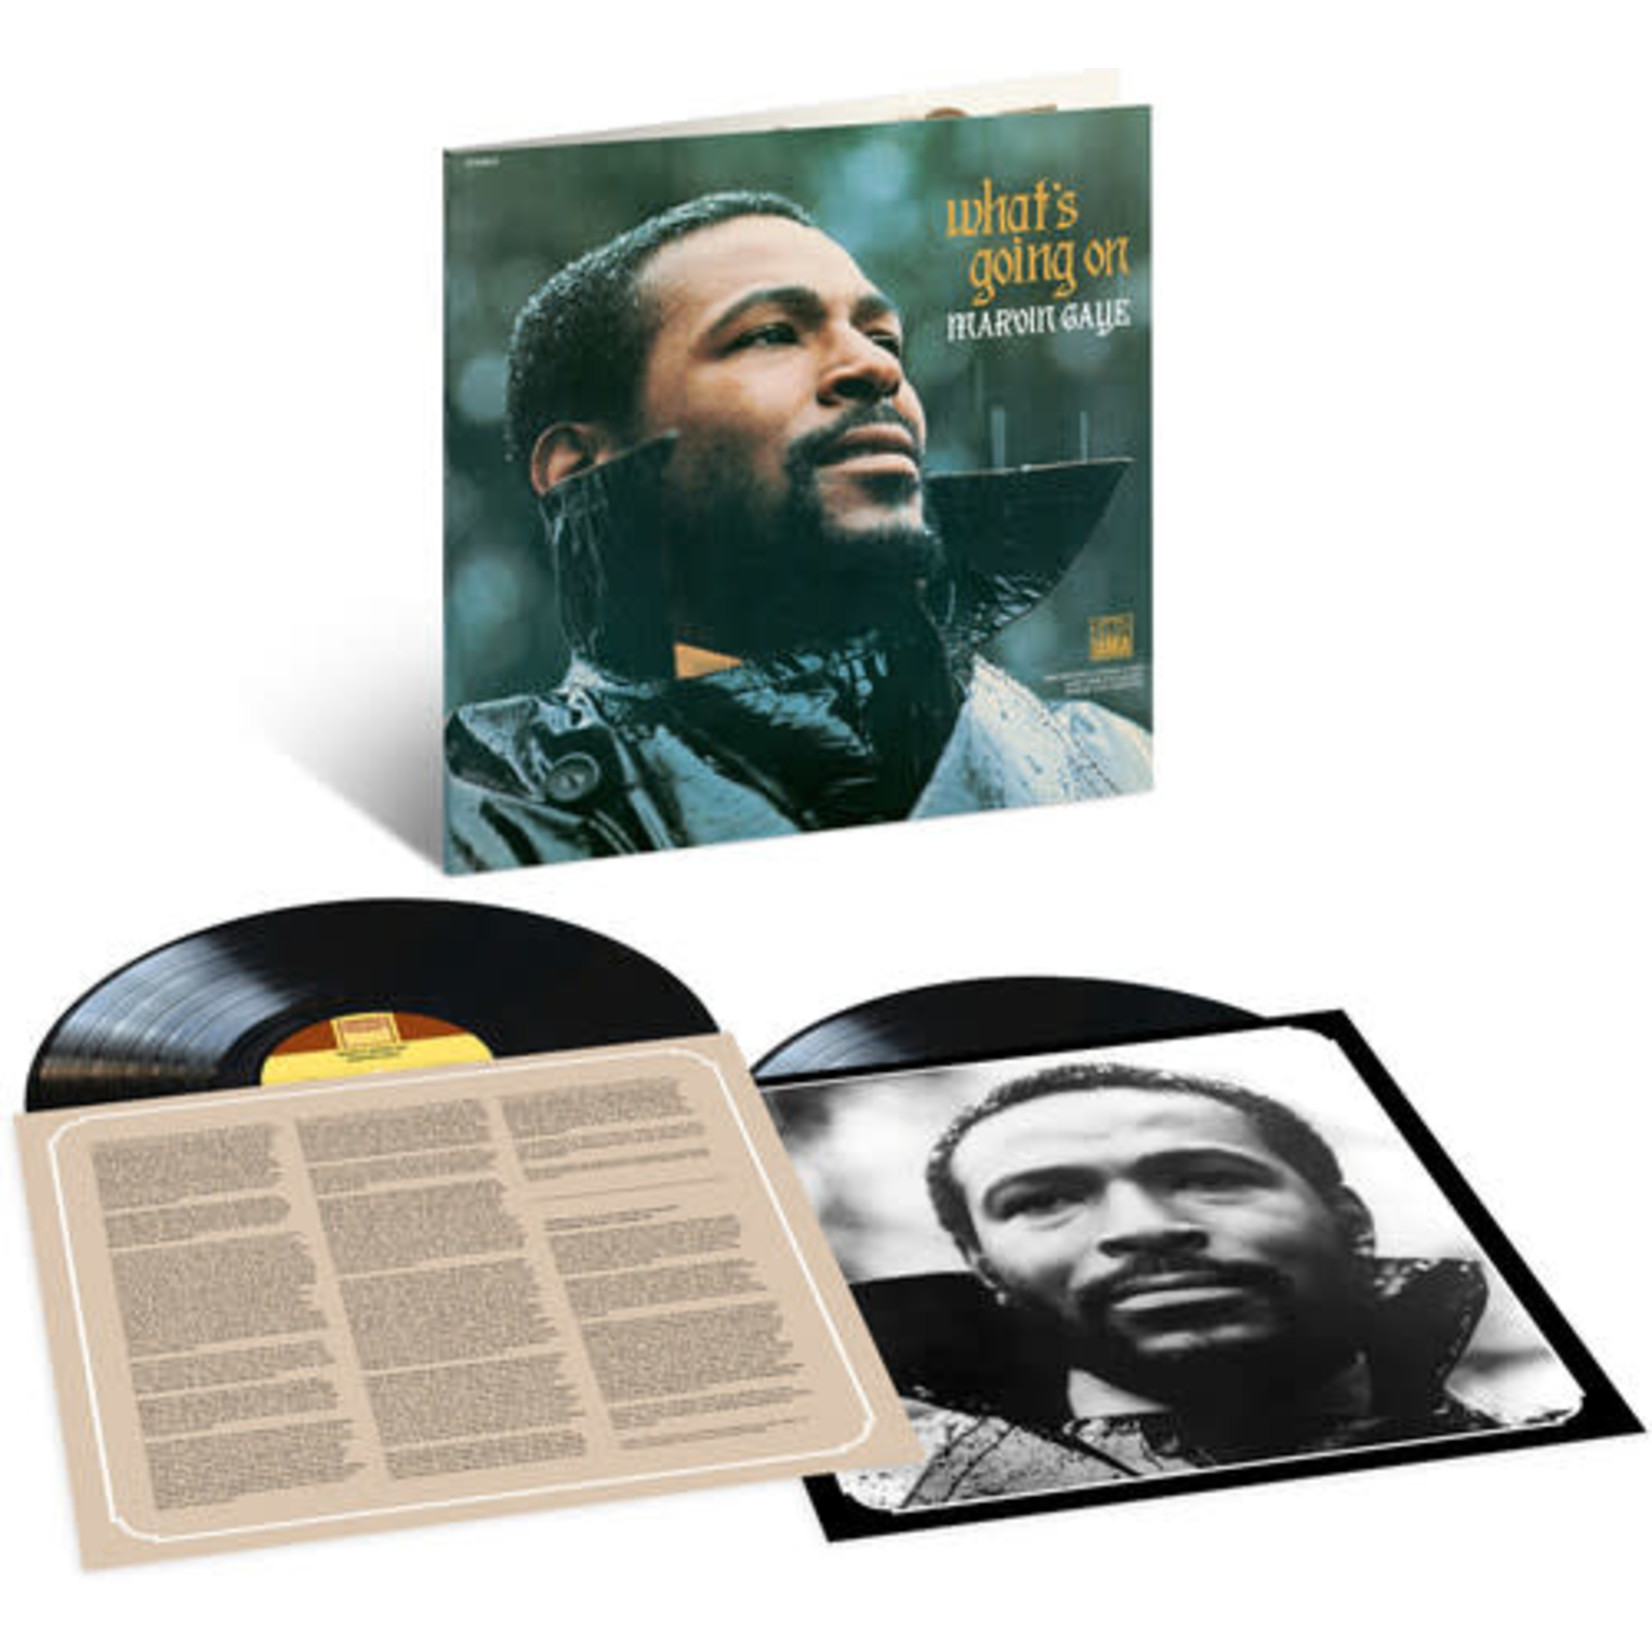 Marvin Gaye - What's Going On (2LP/180g/gatefold) 50th Anniversary